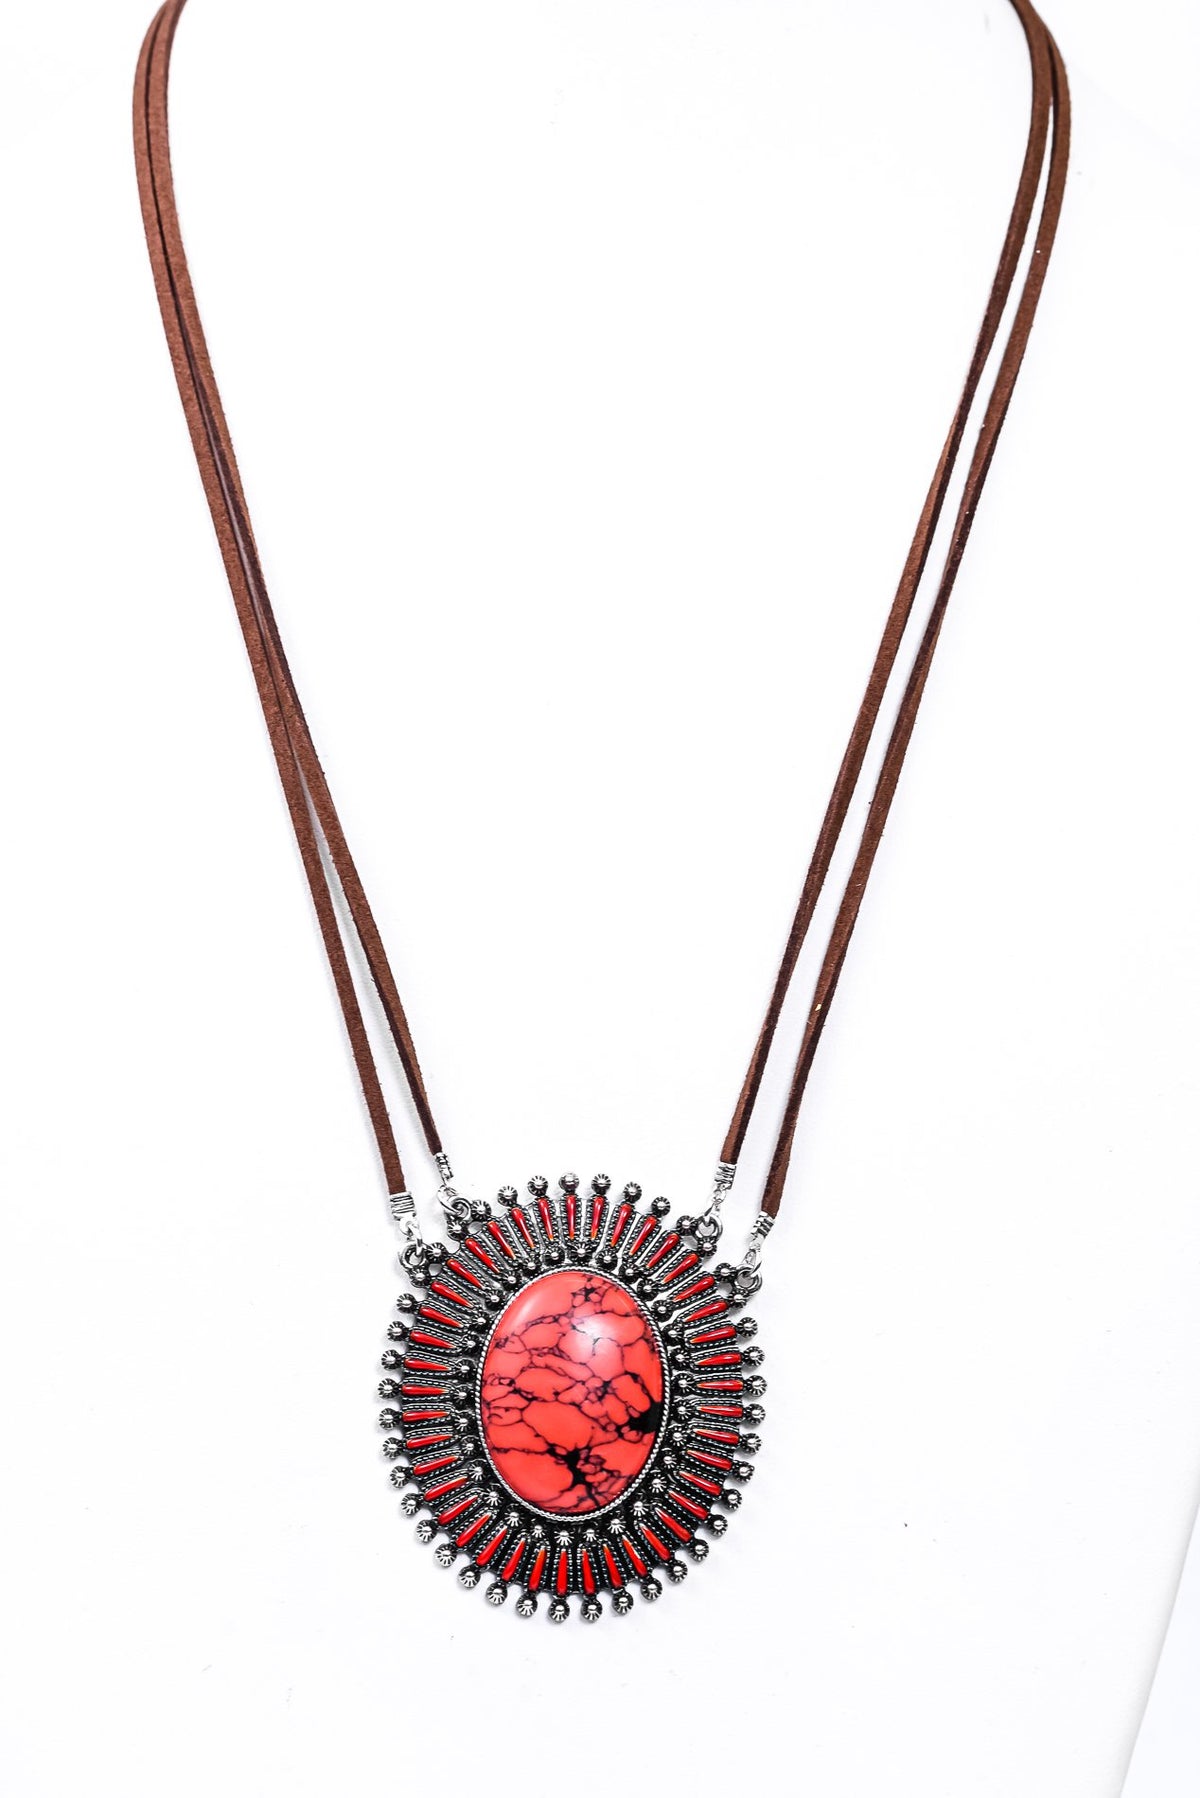 Brown/Red/Silver/Suede/Oval/Marble Stone Pendant Necklace - NEK3837BR